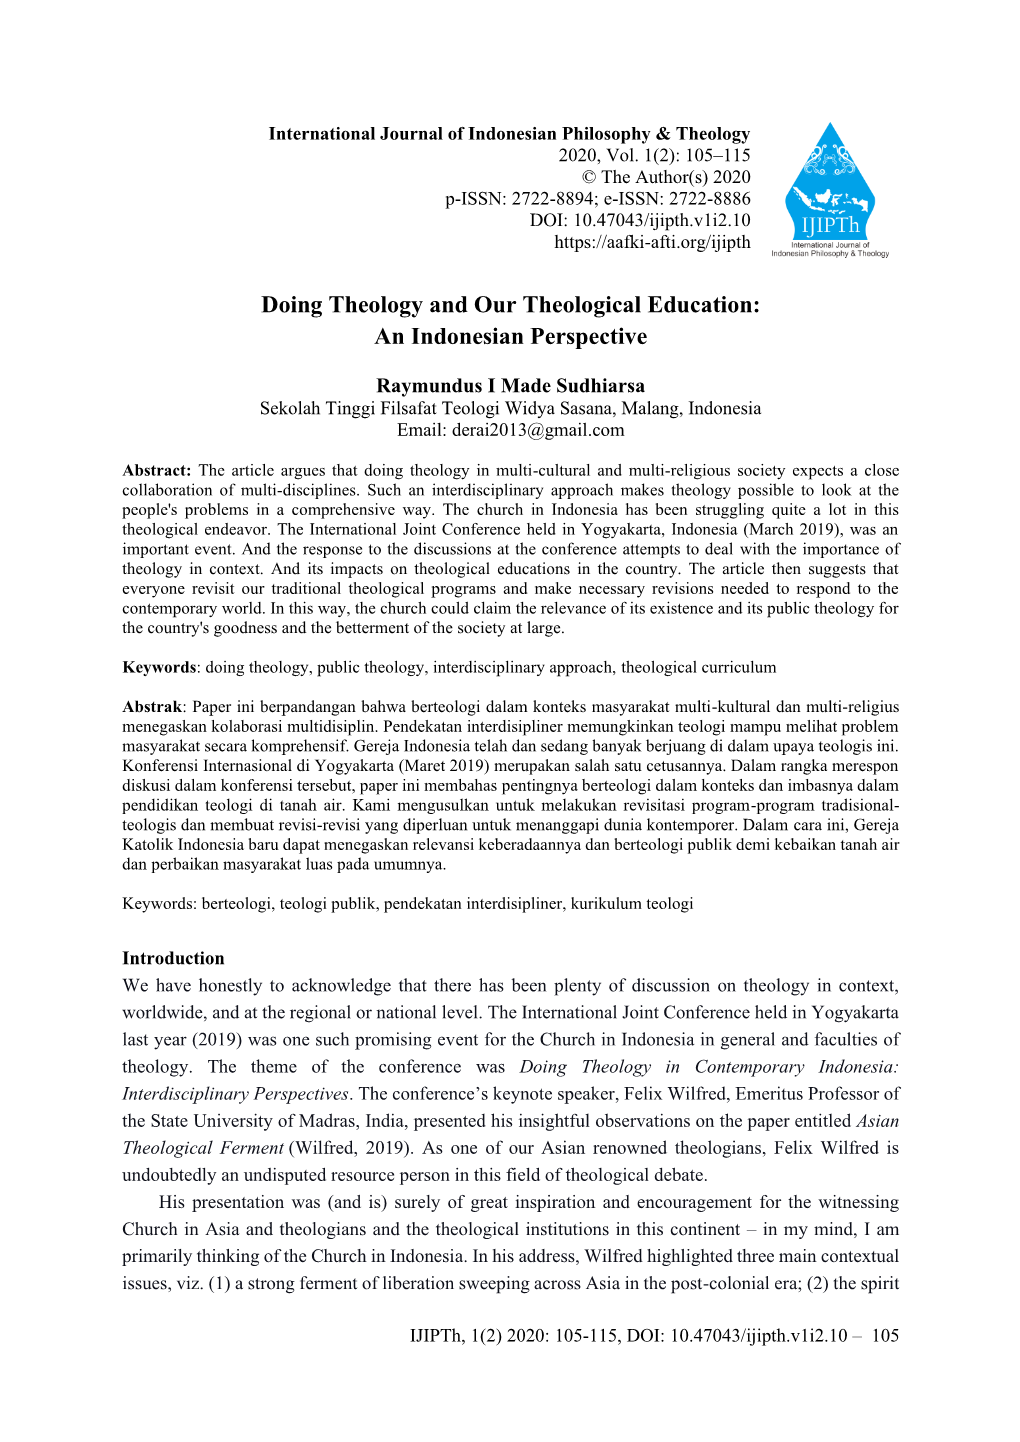 Doing Theology and Our Theological Education: an Indonesian Perspective